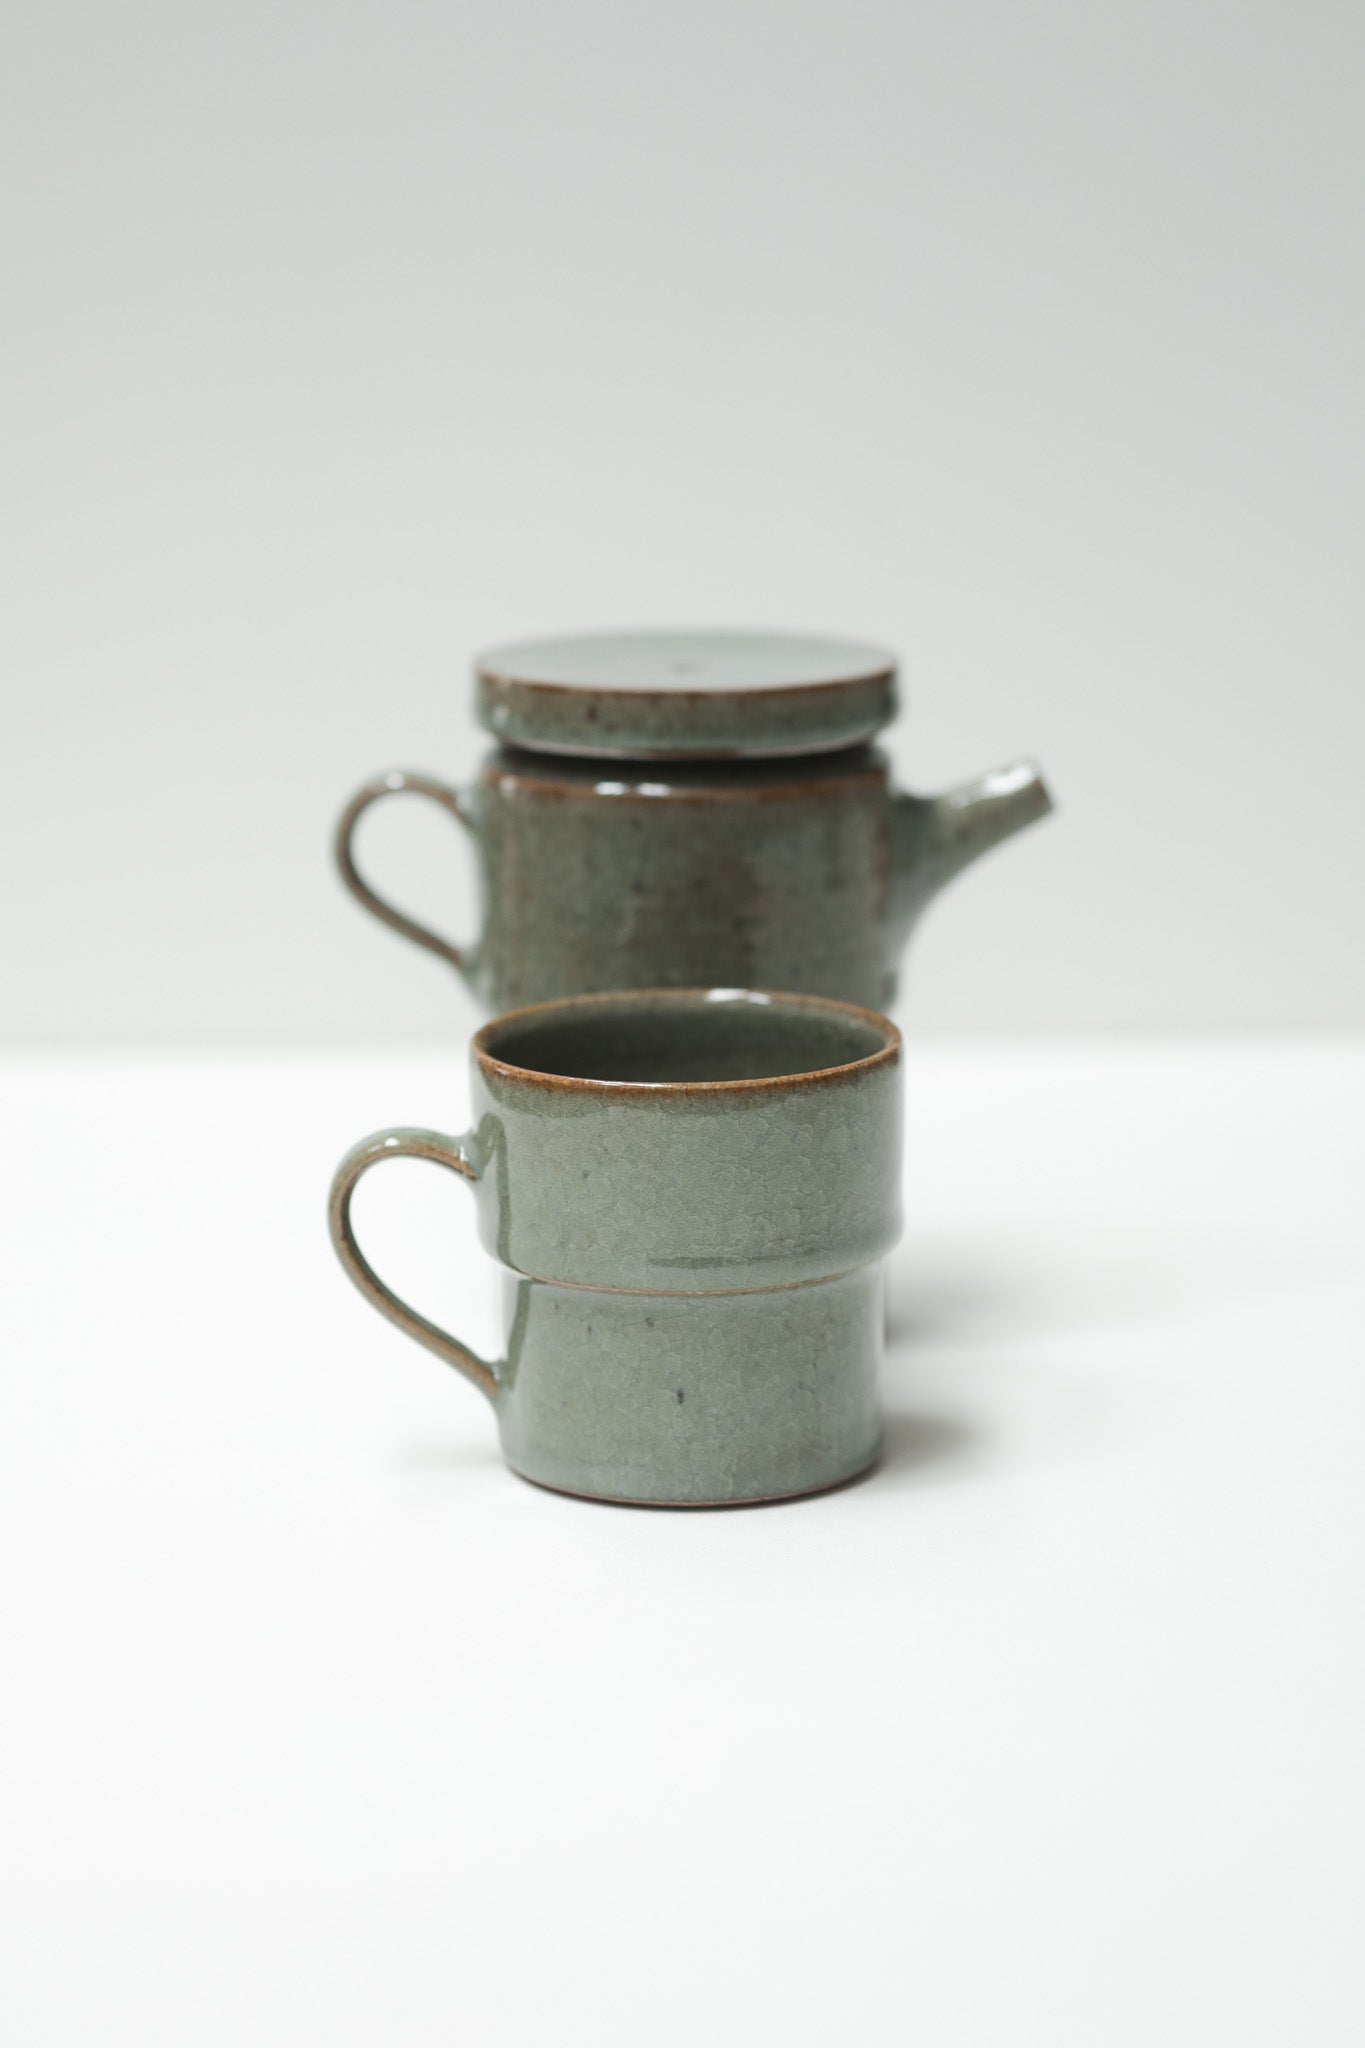 Florian Gadsby: Stepped Teaware for One